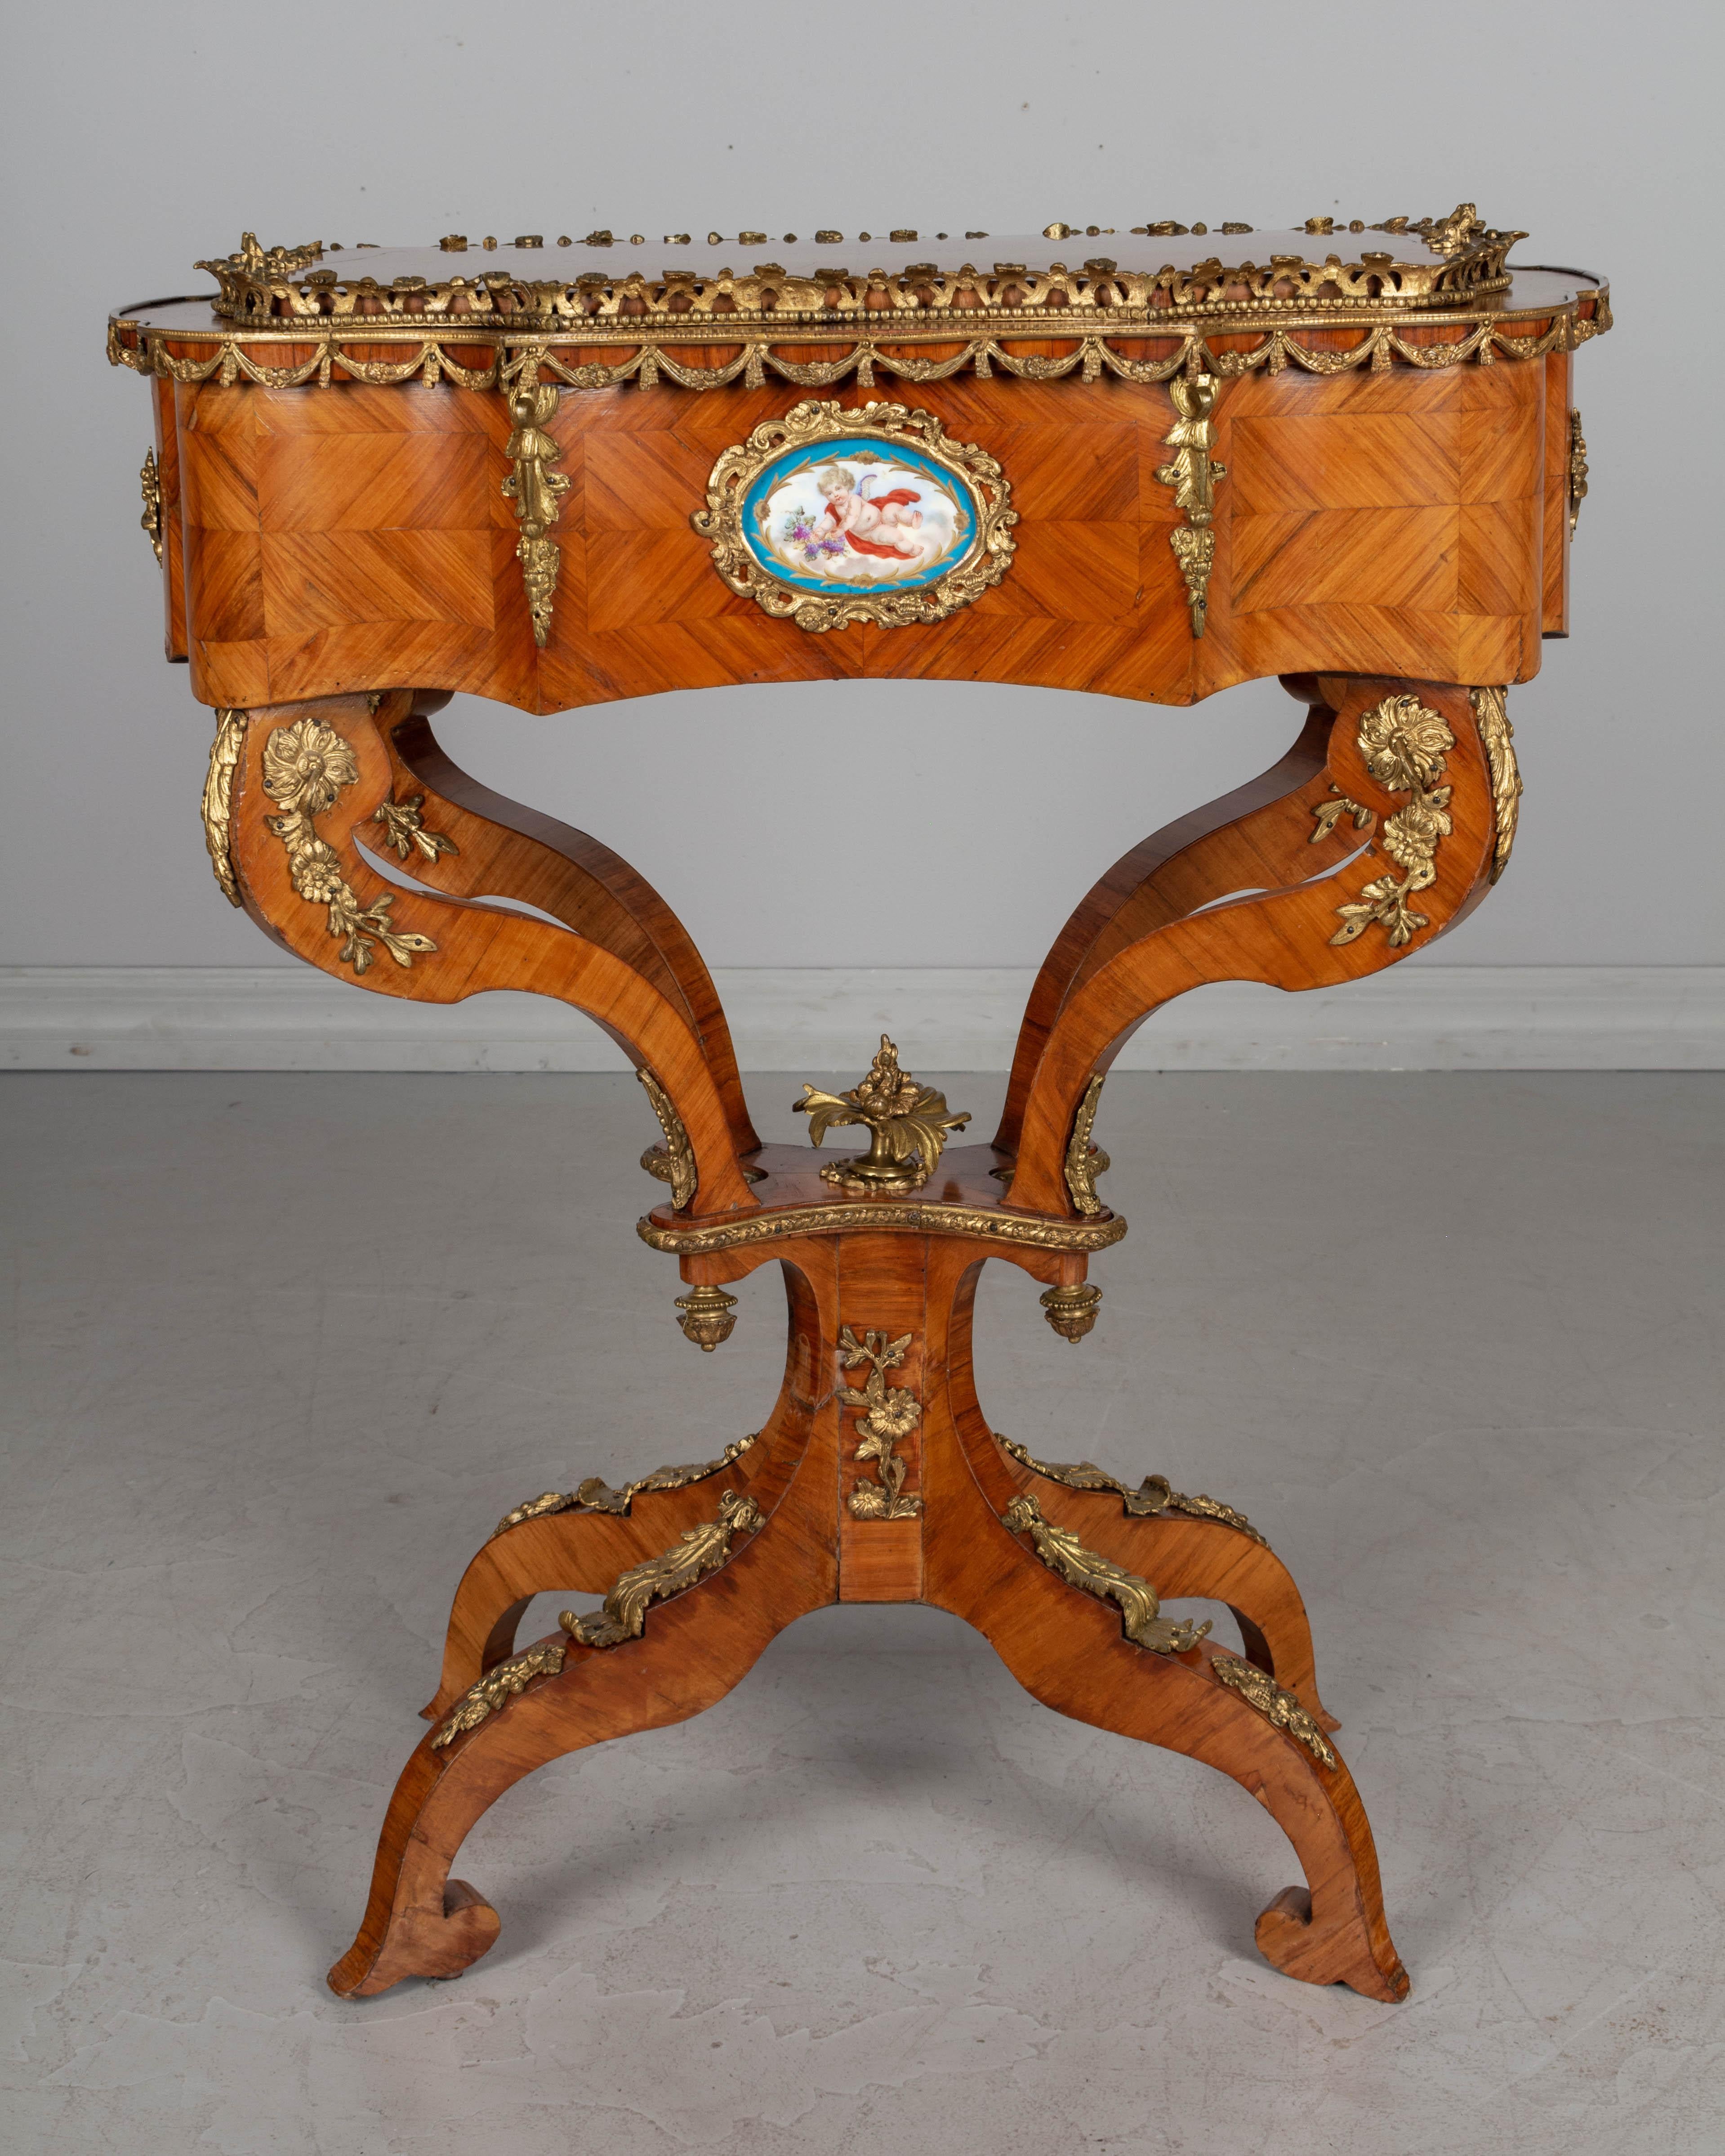 A 19th century French Louis XV style Rococo bronze mounted jardinière, or planter, on a pedestal stand. Kingwood marquetry veneer retains the old French polish finish. Decorated with two Sèvres hand painted porcelain oval medallions. The top has